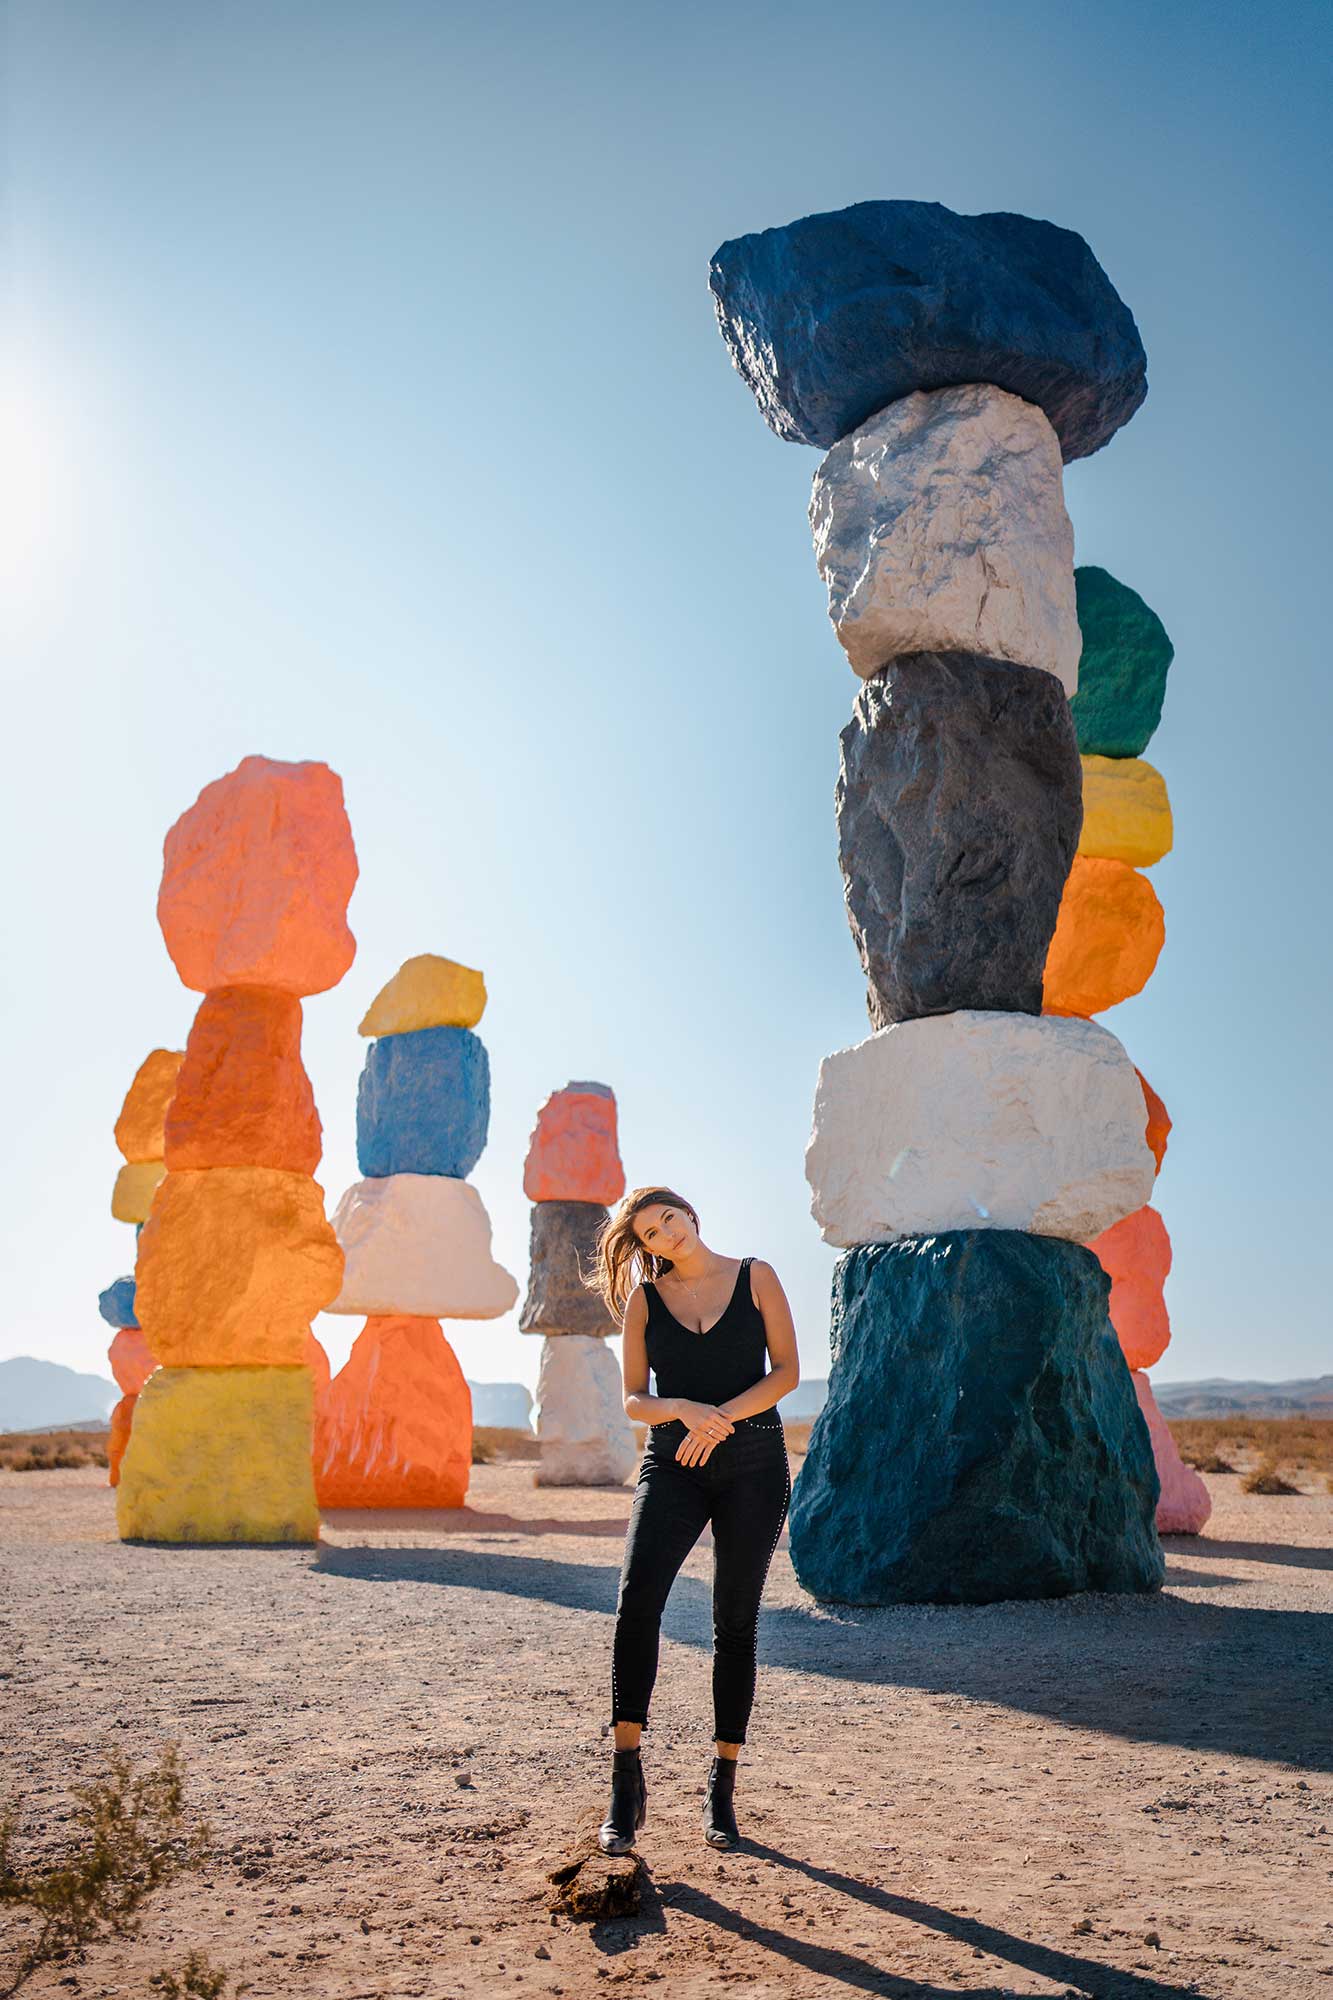 Best Vegas Instagram Spots: Top Locations You Can't Miss on the Strip 7 Magic Mountains